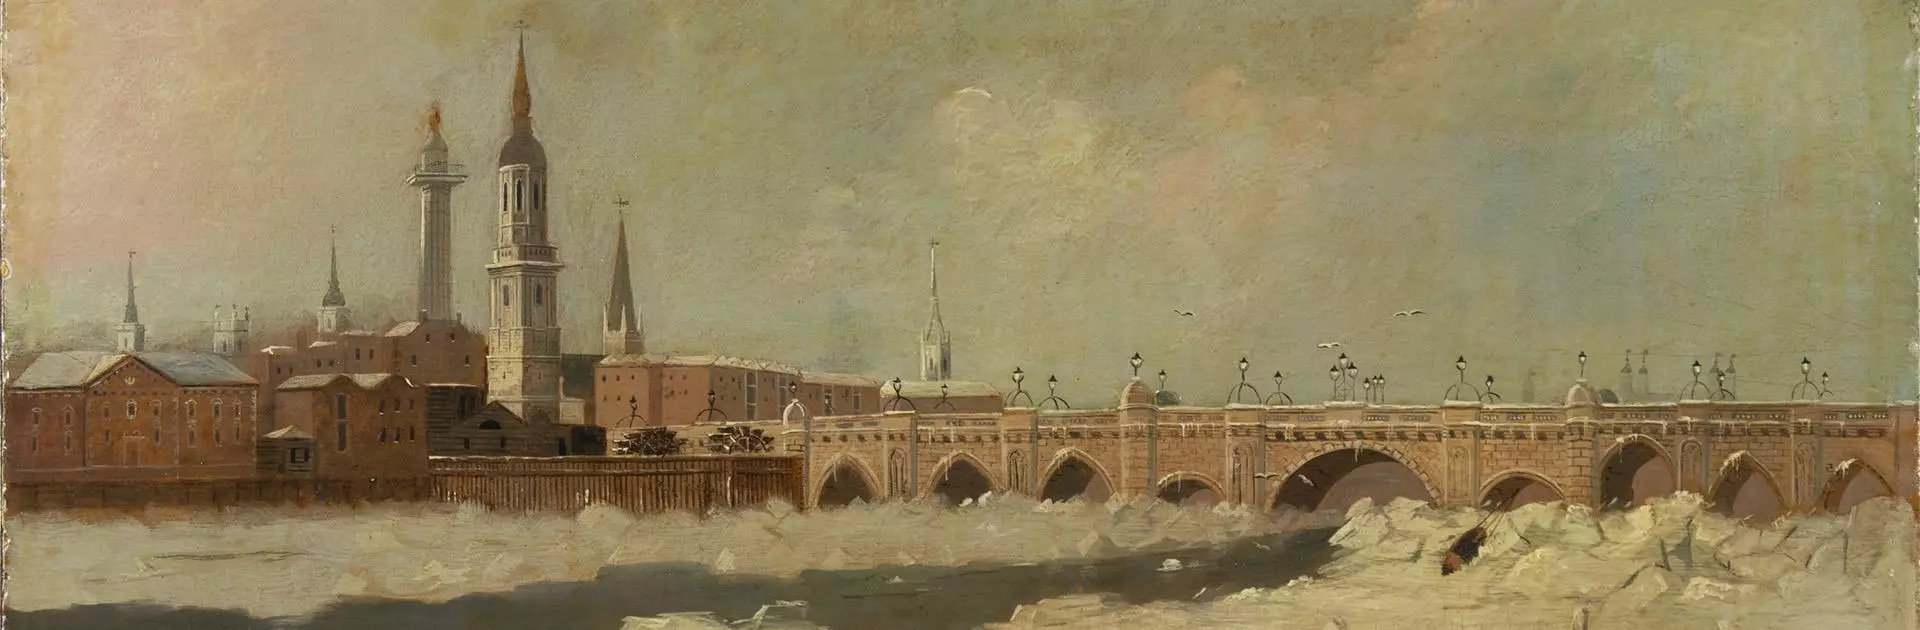 The City of London - History of Guildhall Art Gallery - Conservation of ‘London Bridge’ by Daniel Turner - painting of London bridge